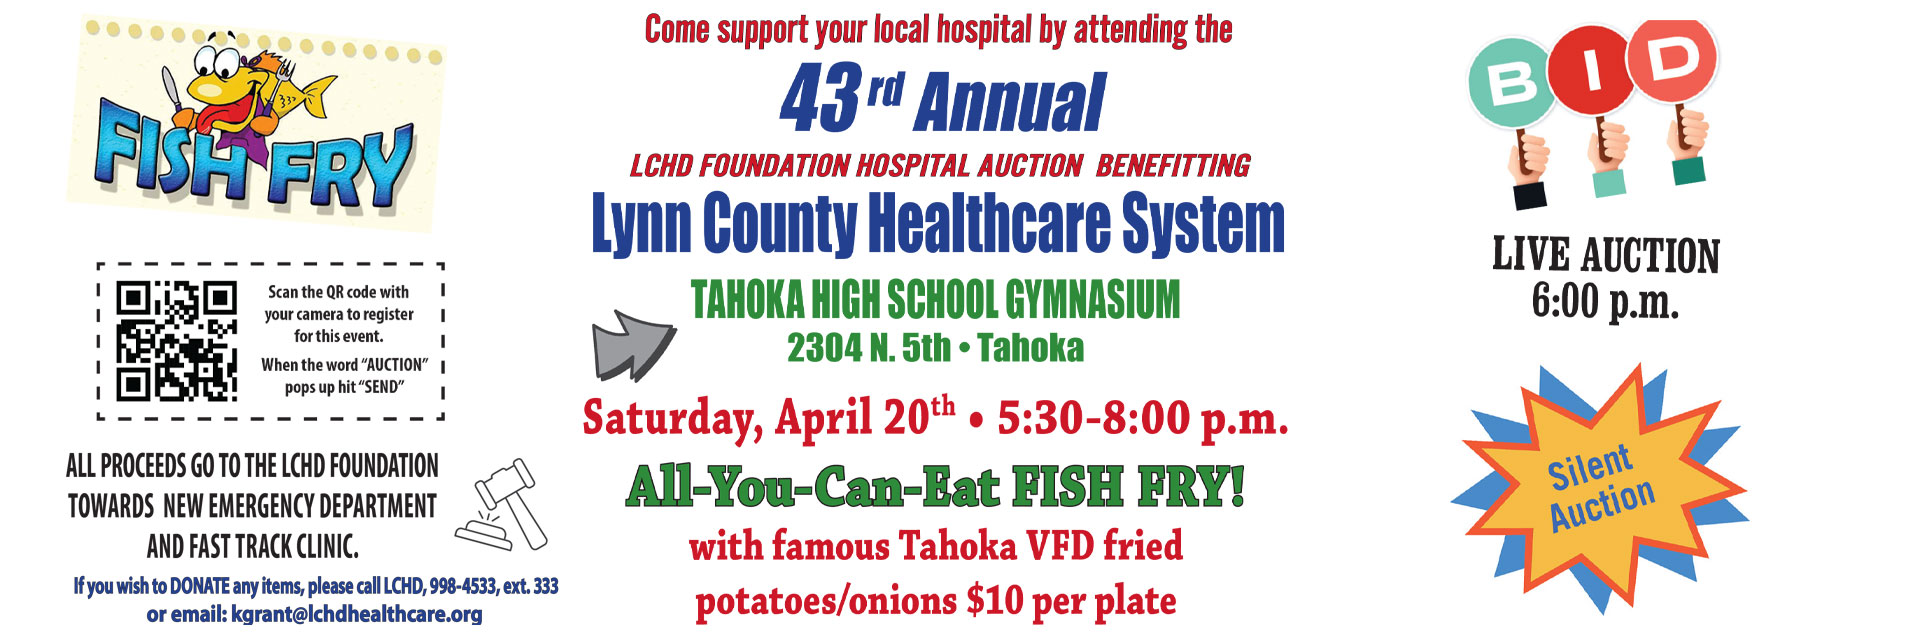 Come Support your local hospital by attending the 43rd Annual LCHD Foundation Hospital Auction

Saturday April 20th - 5:30pm - 8:00pm